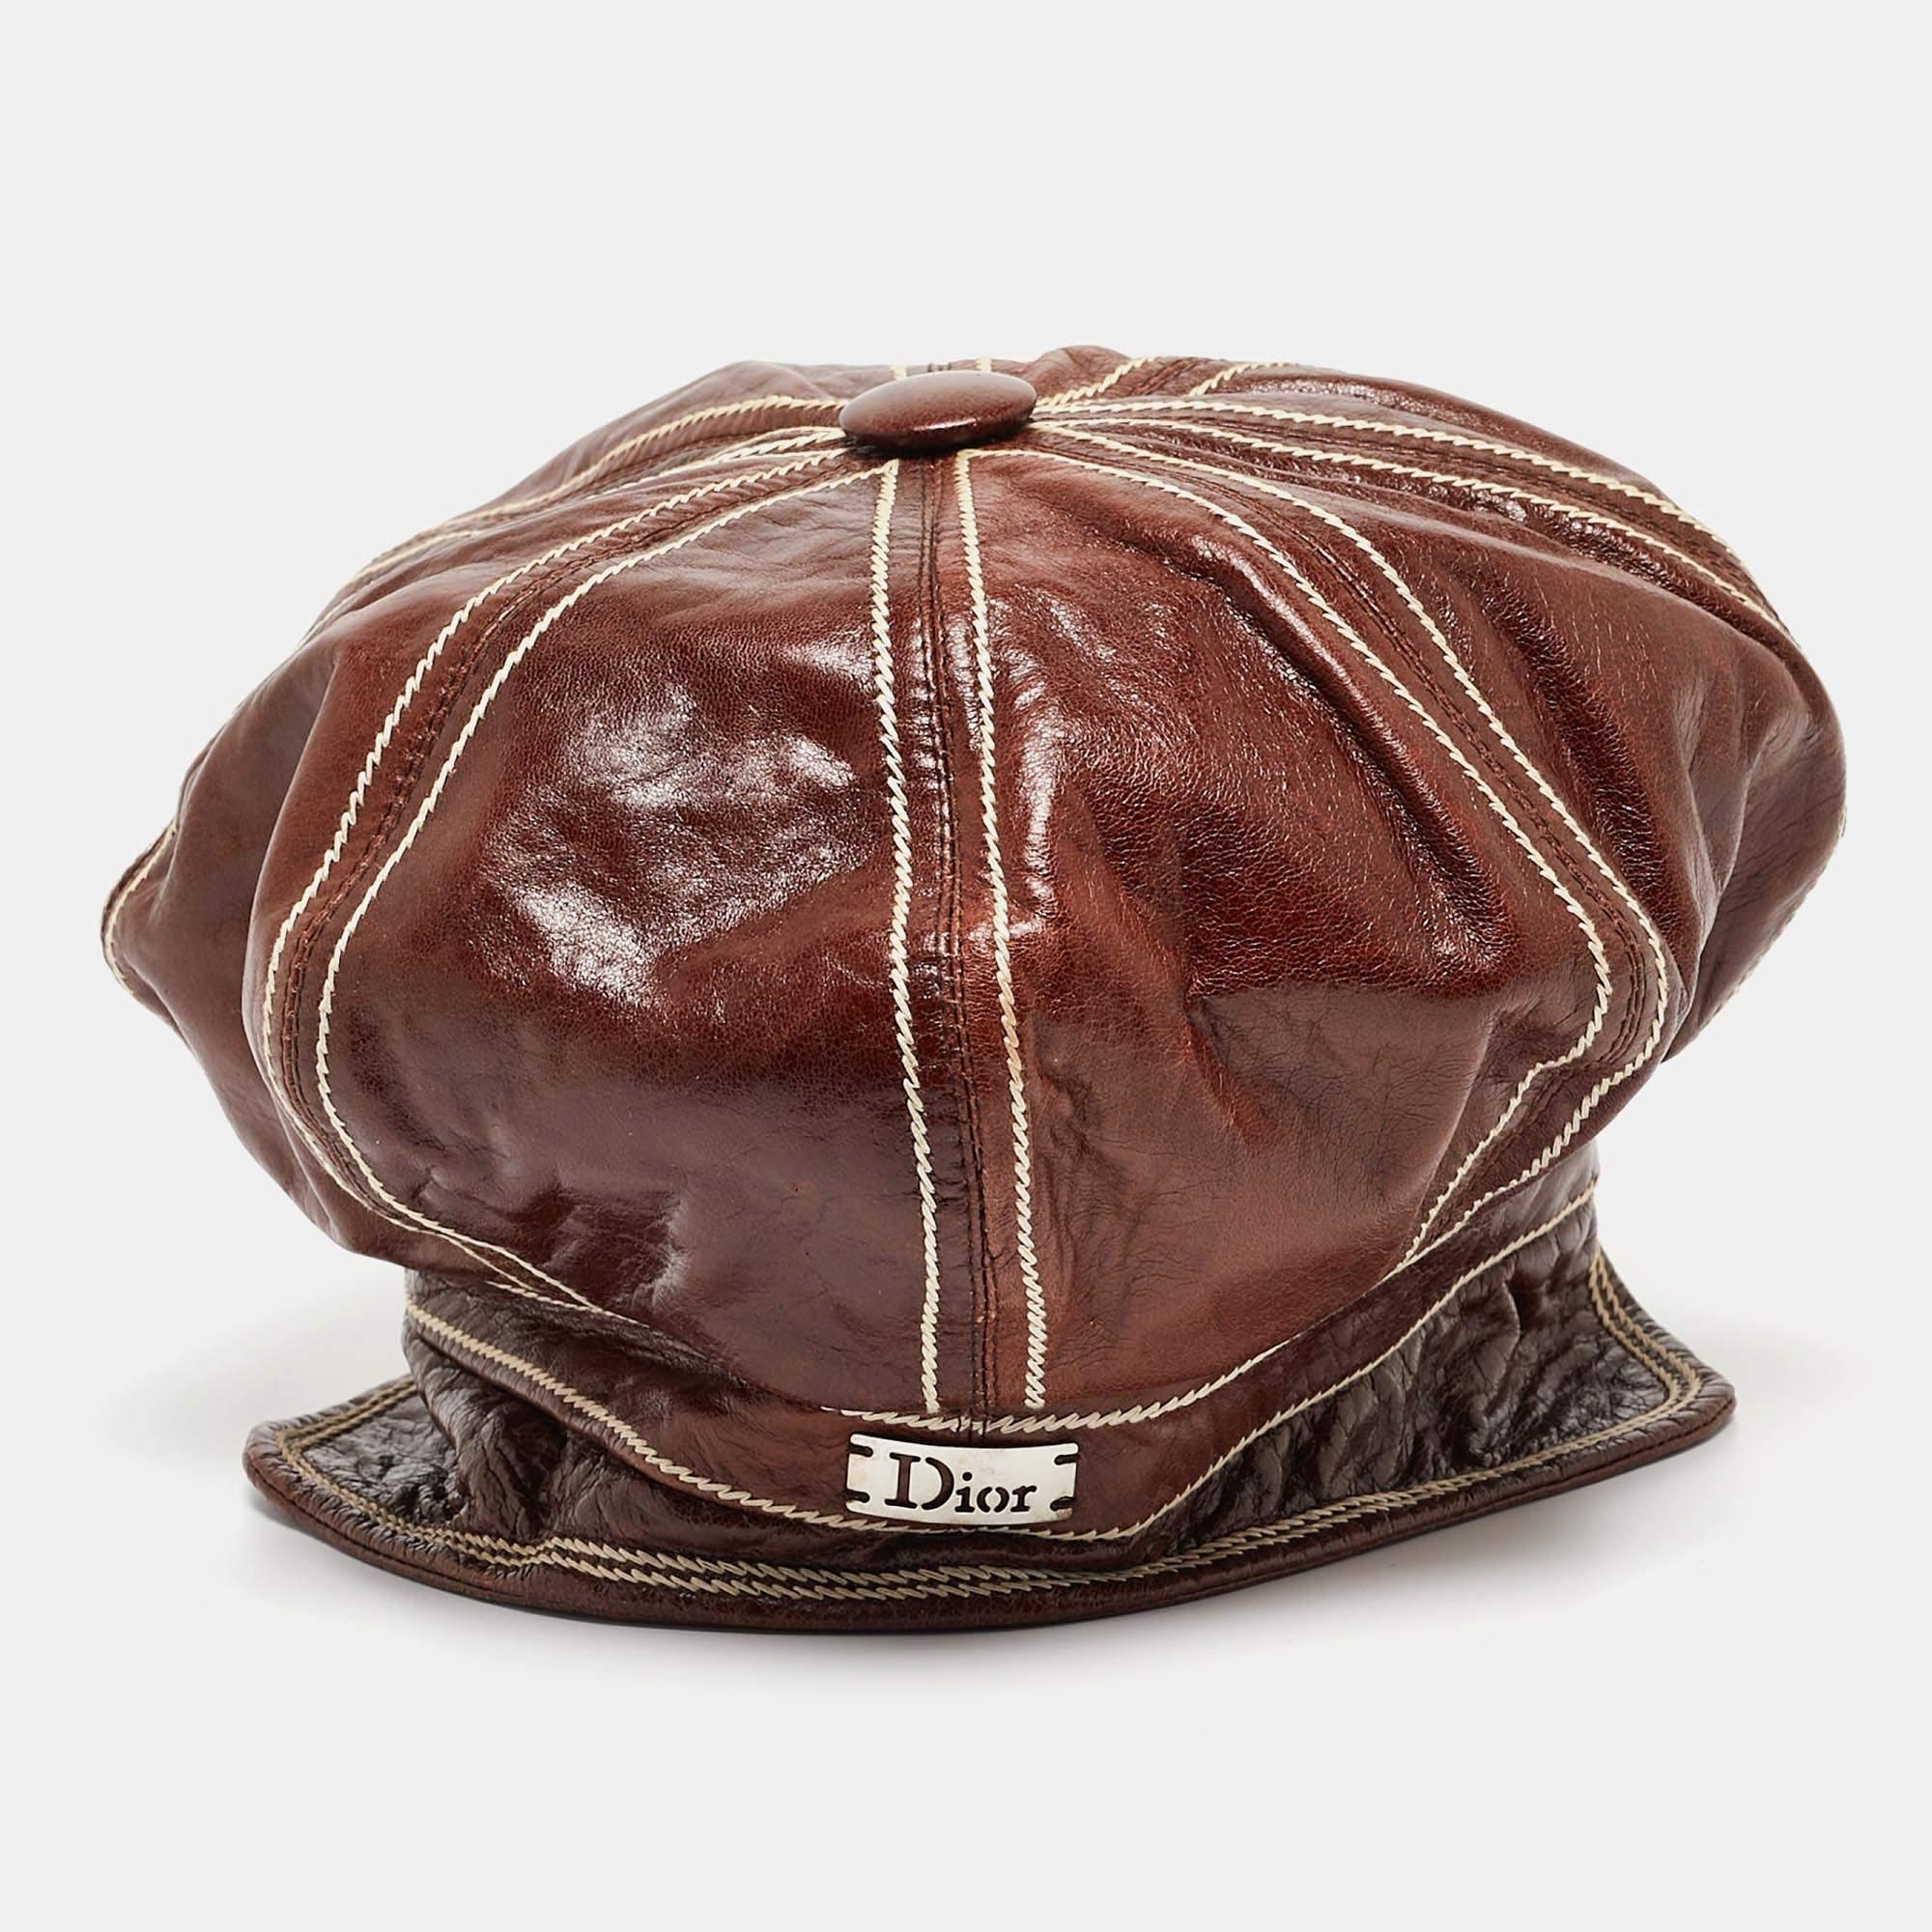 Put the finishing touch to your outfit with this newsboy cap by Dior. This brown cap is made from leather and features the brand name on the back.

